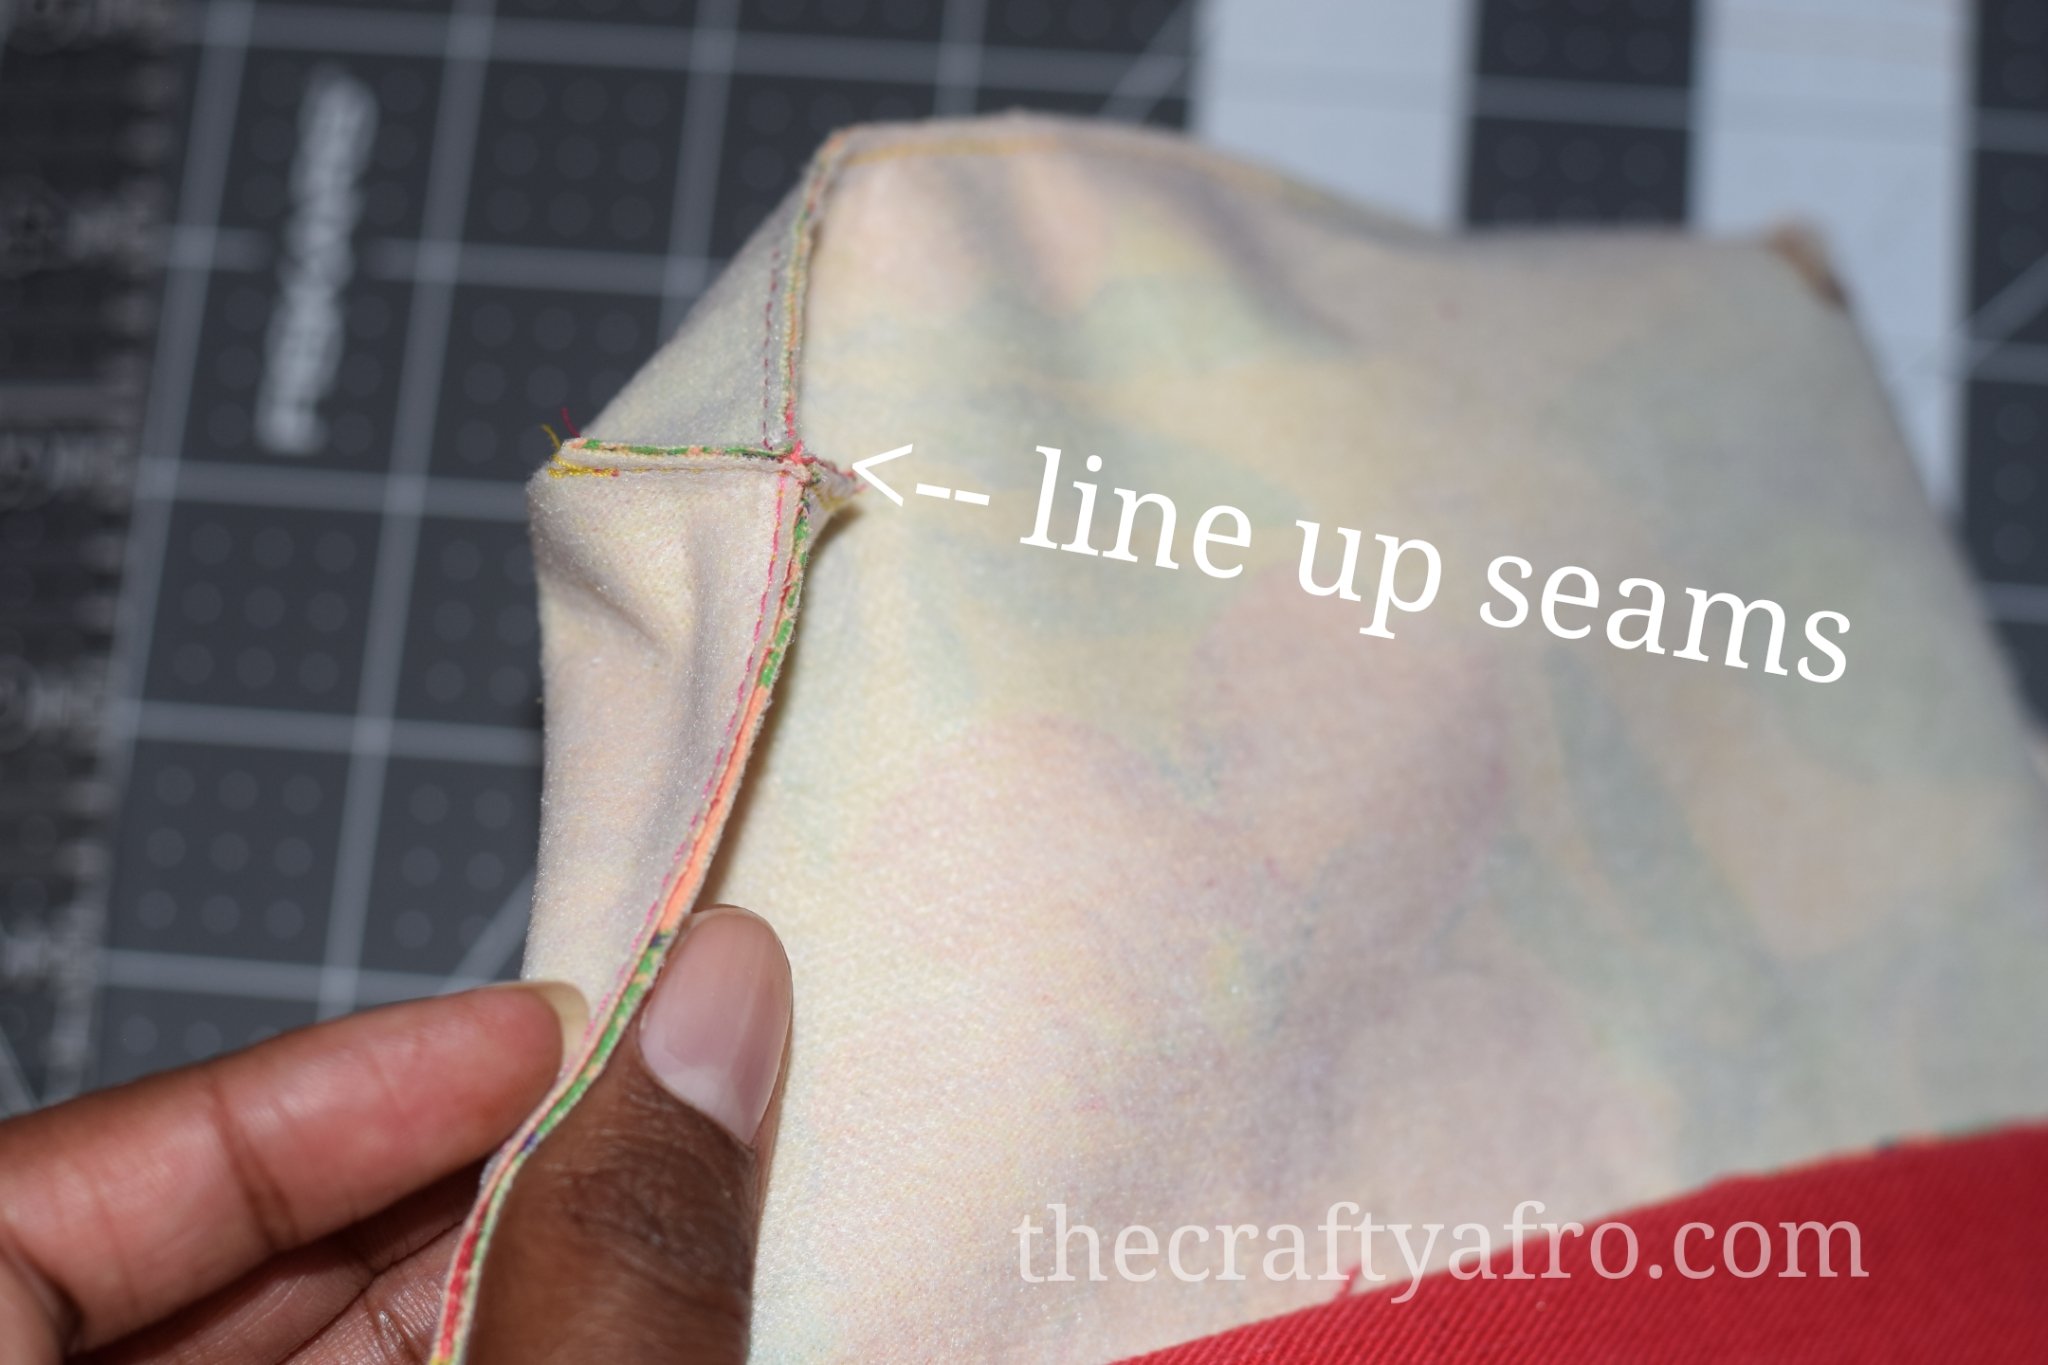 Align your seams before sewing the corners together.